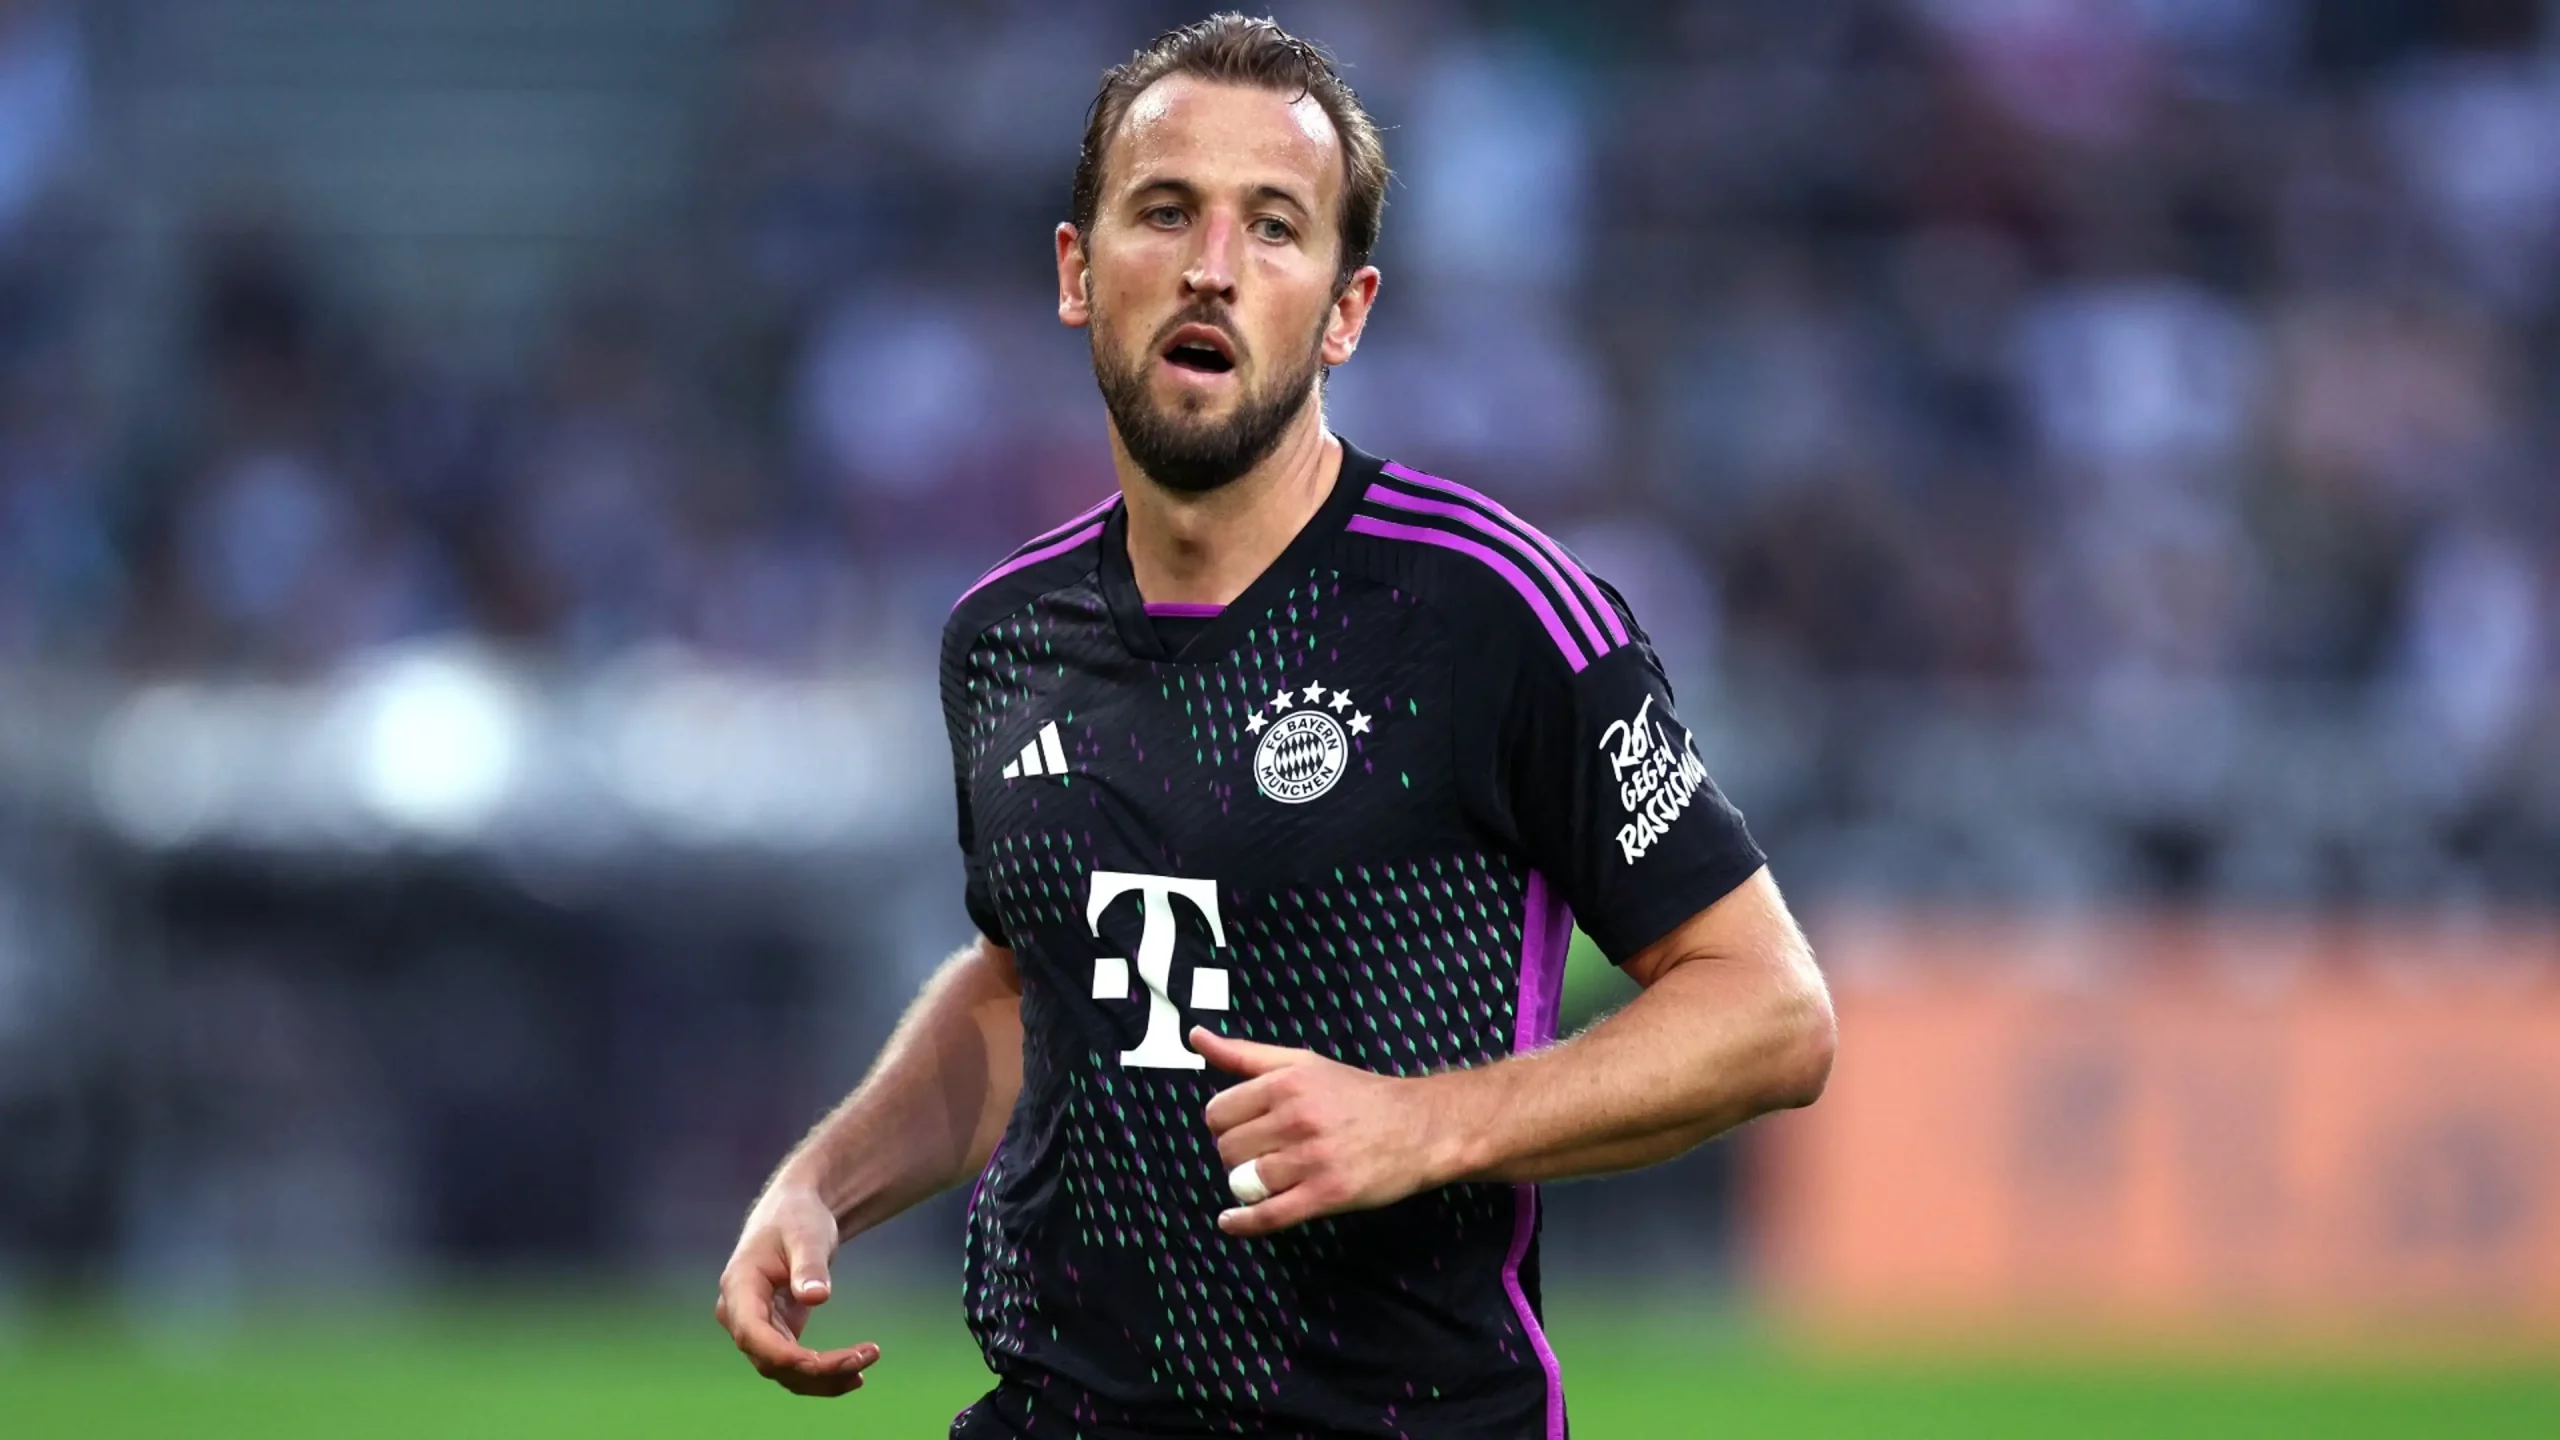 TOTTENHAM HAS A CLAUSE TO BUY BACK HARRY KANE FROM BAYERN